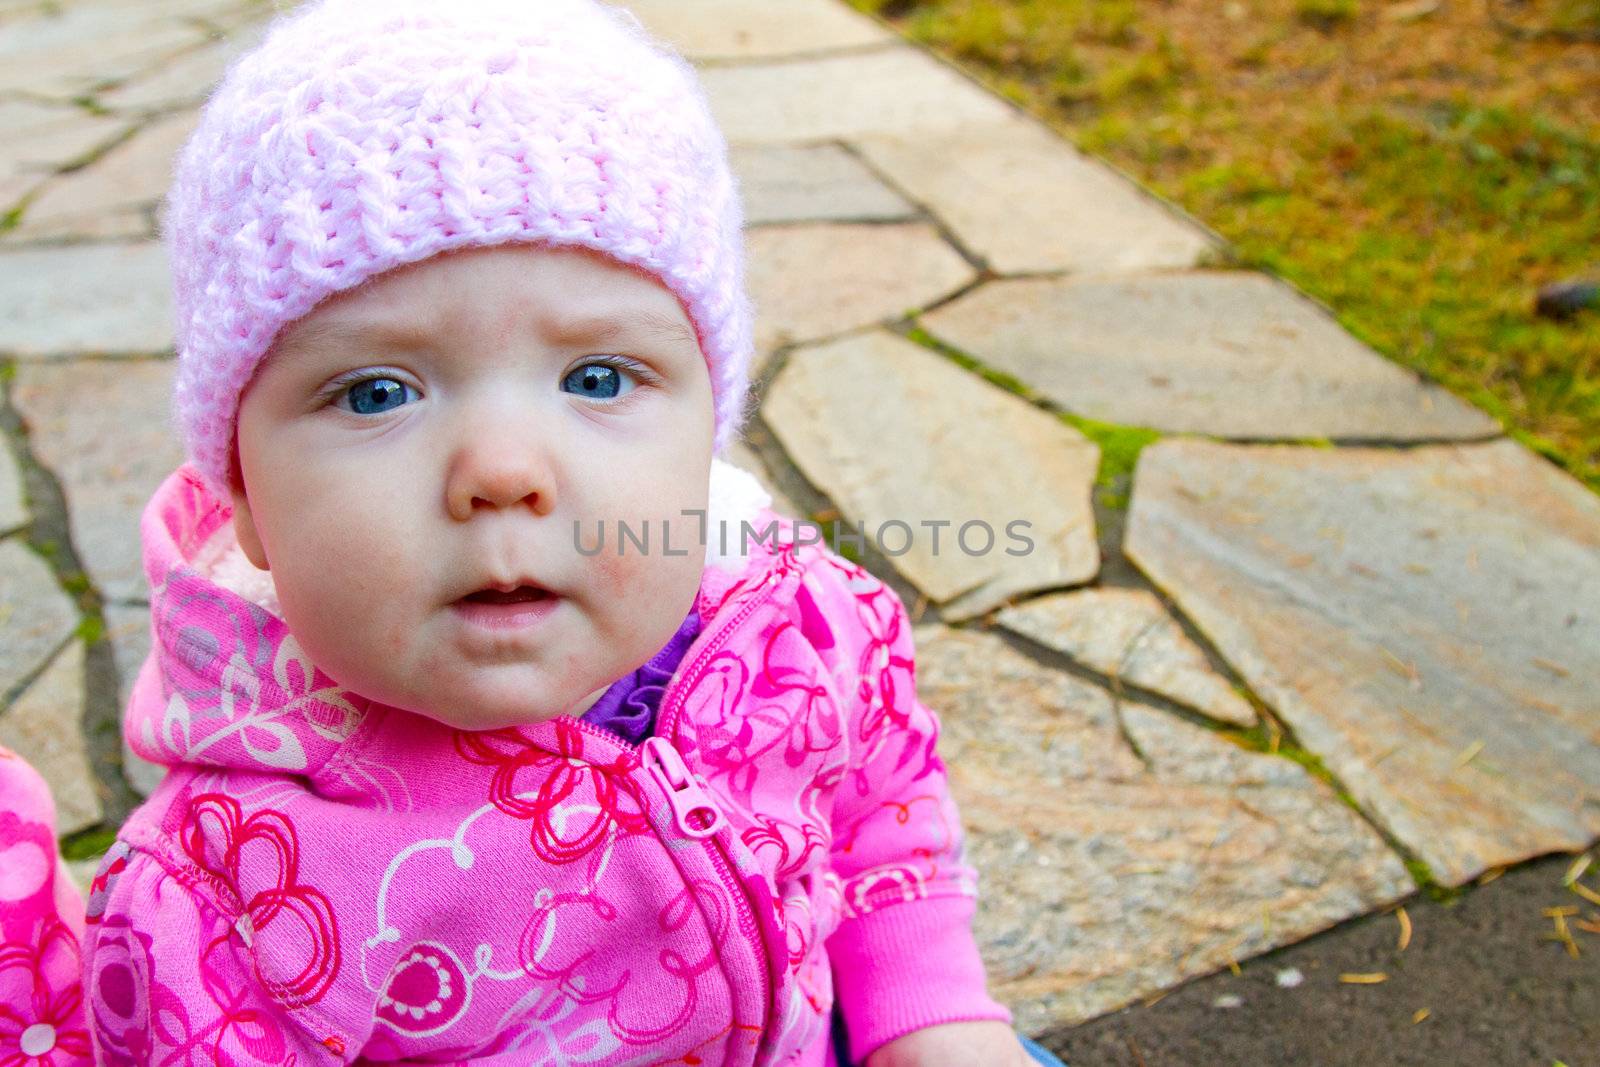 A young infant girl wearing a pink sweatshirt and a knitted cap sits on a stone walkway for a portrait.